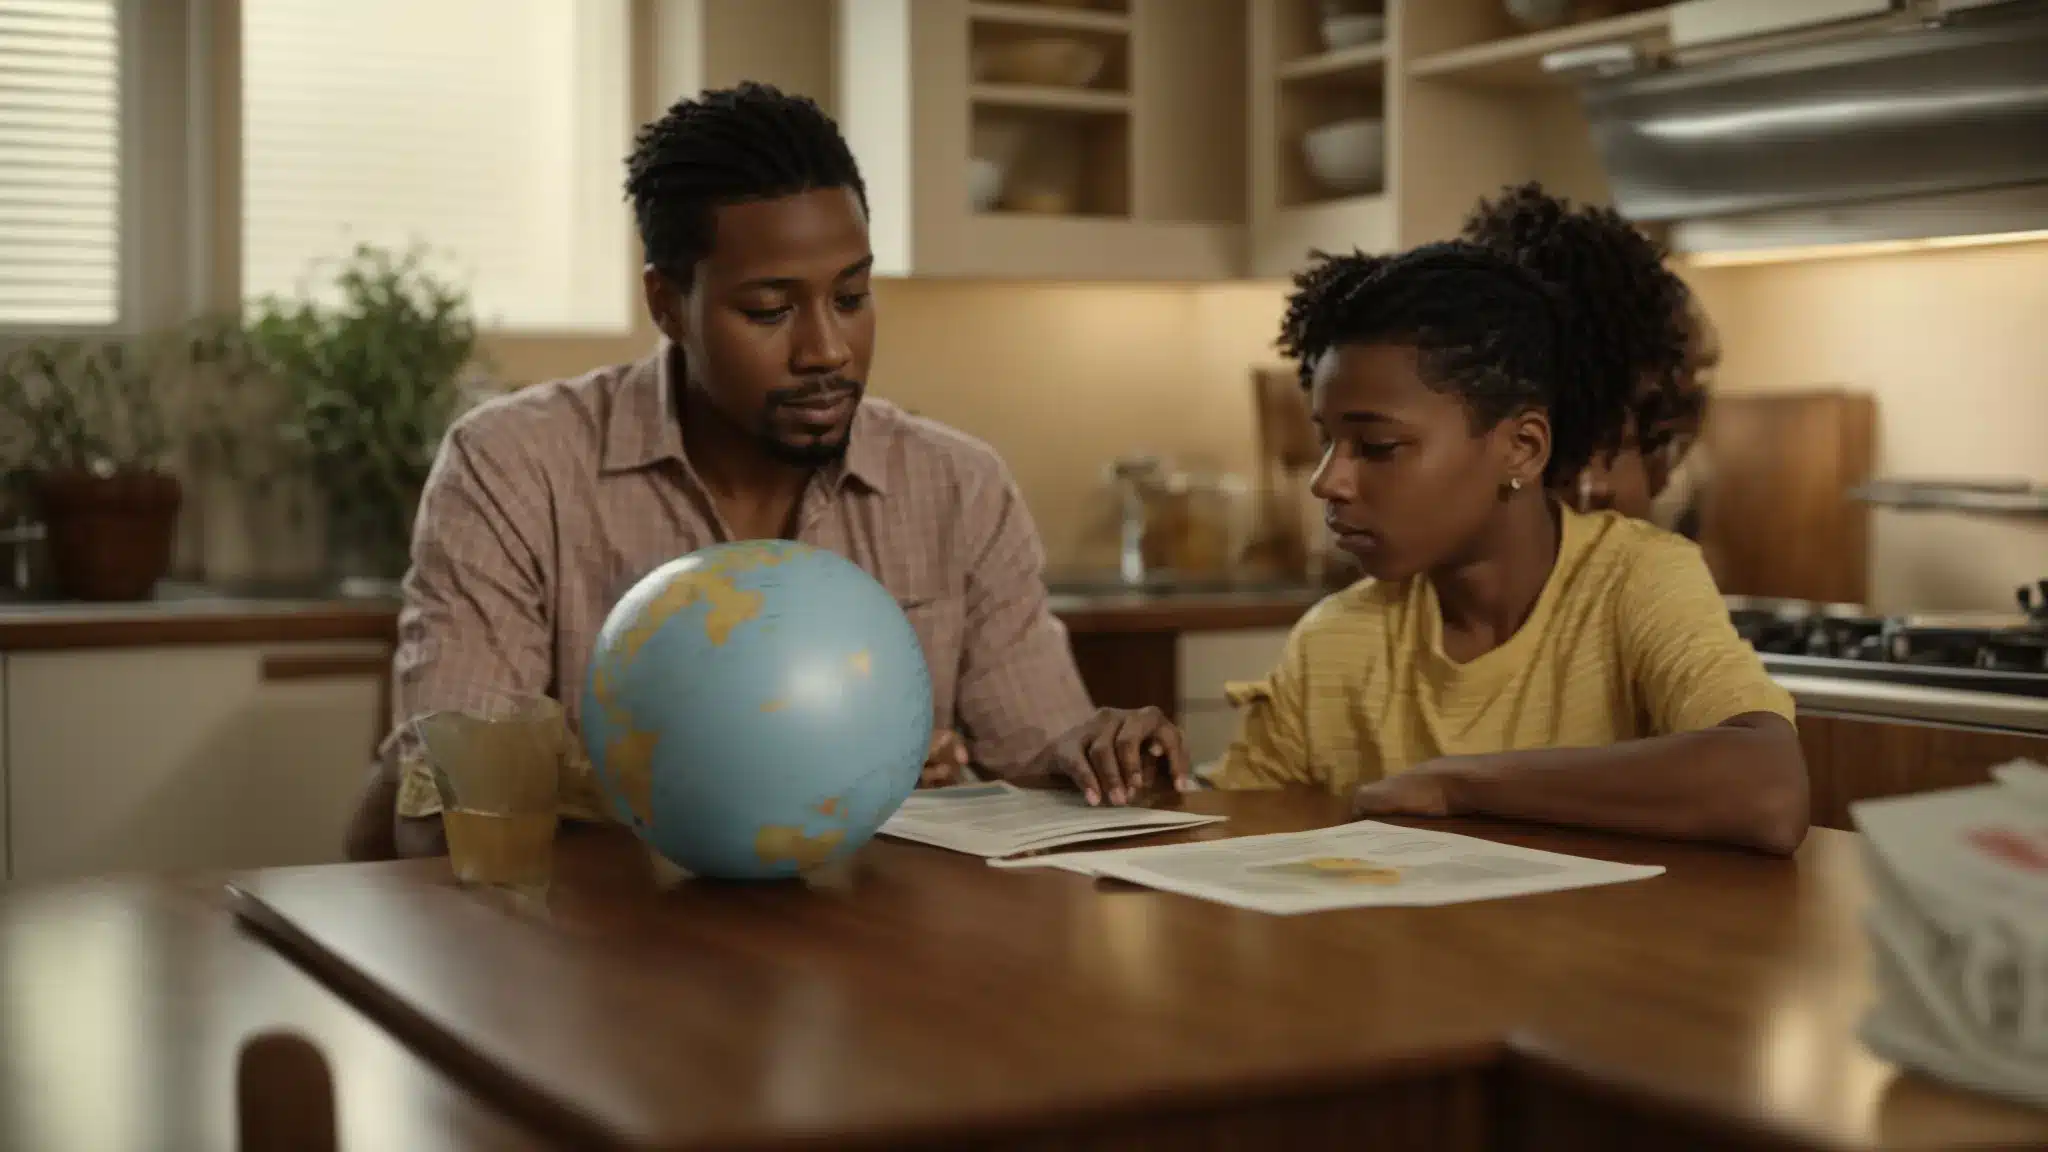 a parent and child sit at a kitchen table, with the parent calmly explaining to the attentive child, using a globe and non-specific election pamphlets as visual aids.